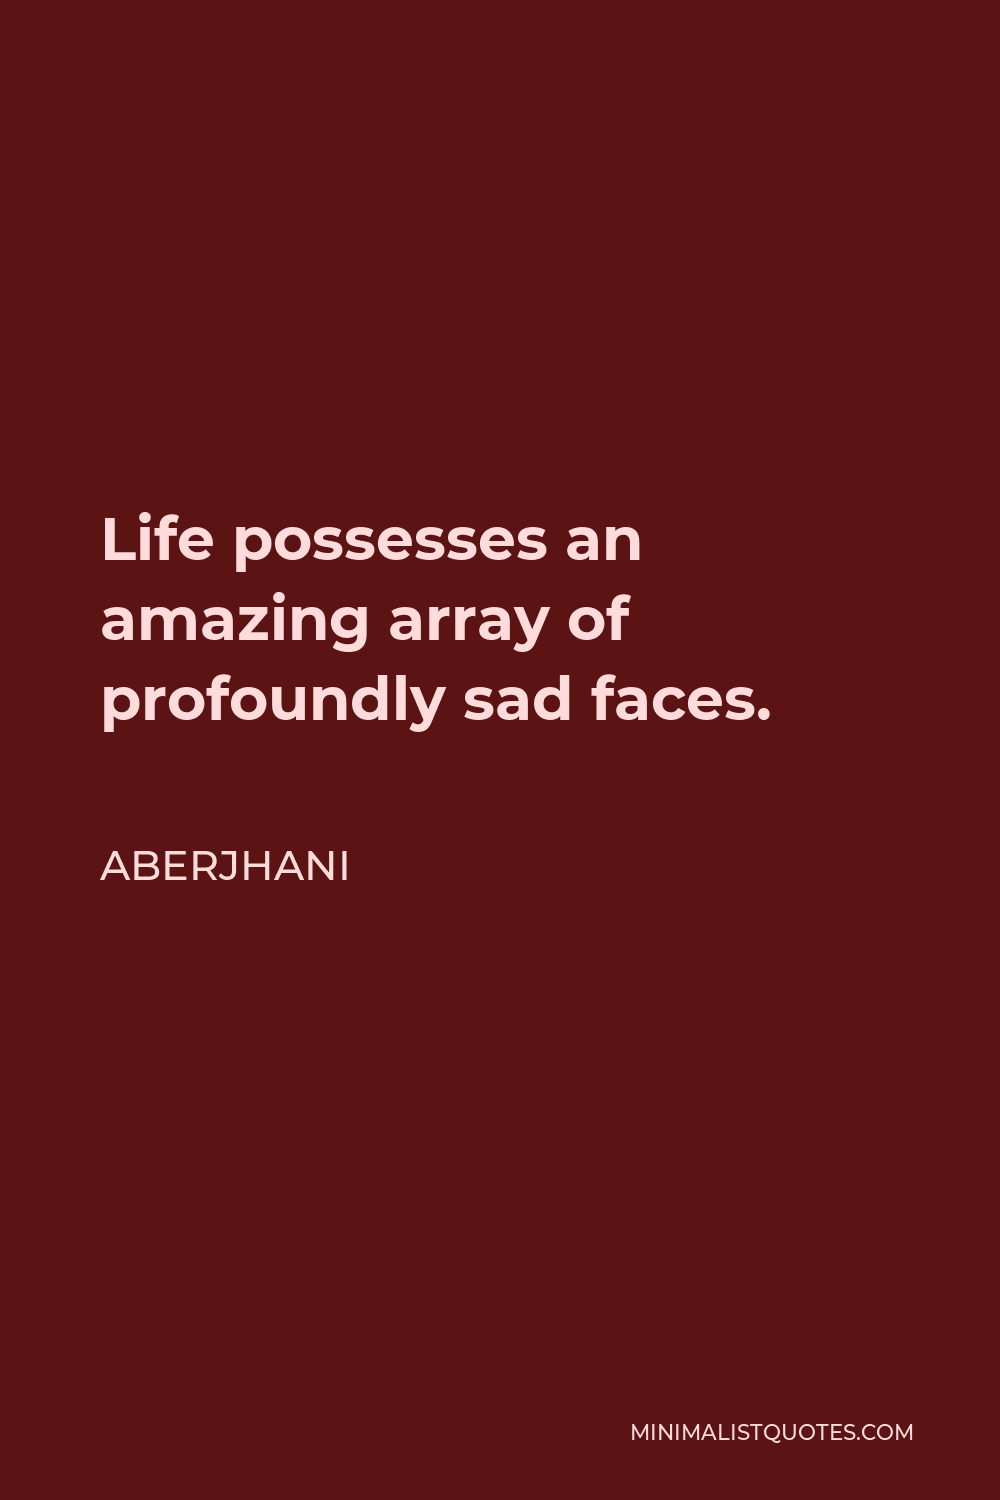 Aberjhani Quote - Life possesses an amazing array of profoundly sad faces.